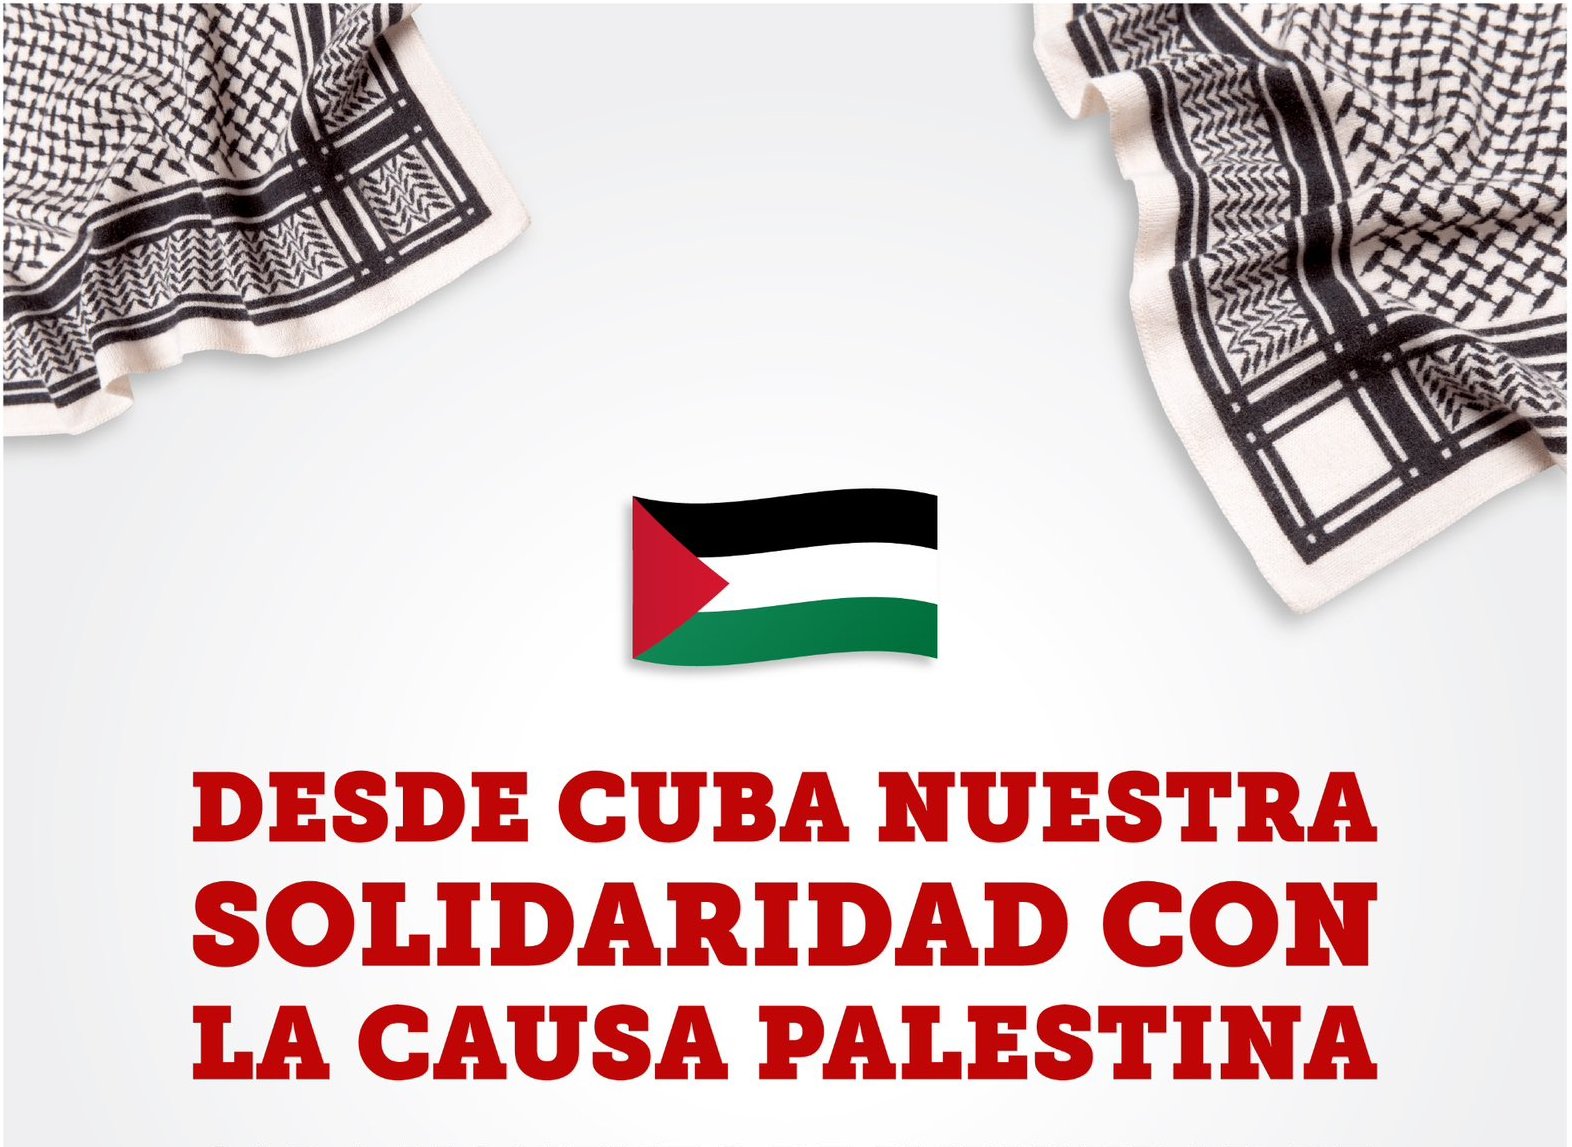 Díaz-Canel reiterates Cuba's solidarity with the Palestinian cause (+ Post)